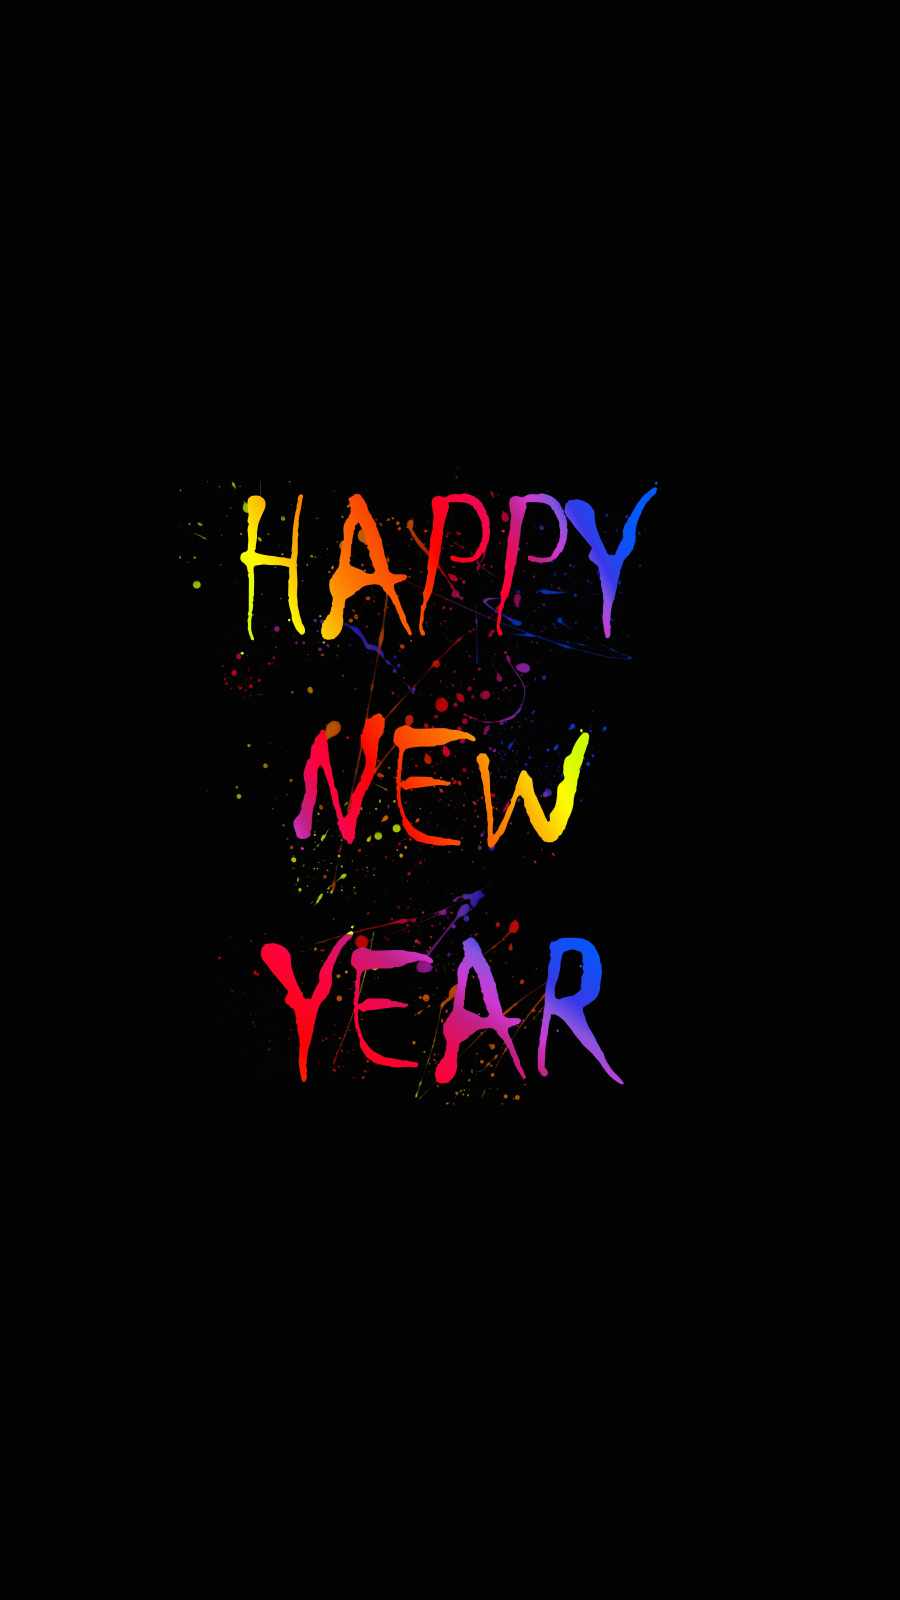 Happy New Year IPhone Wallpaper - IPhone Wallpapers : iPhone Wallpapers